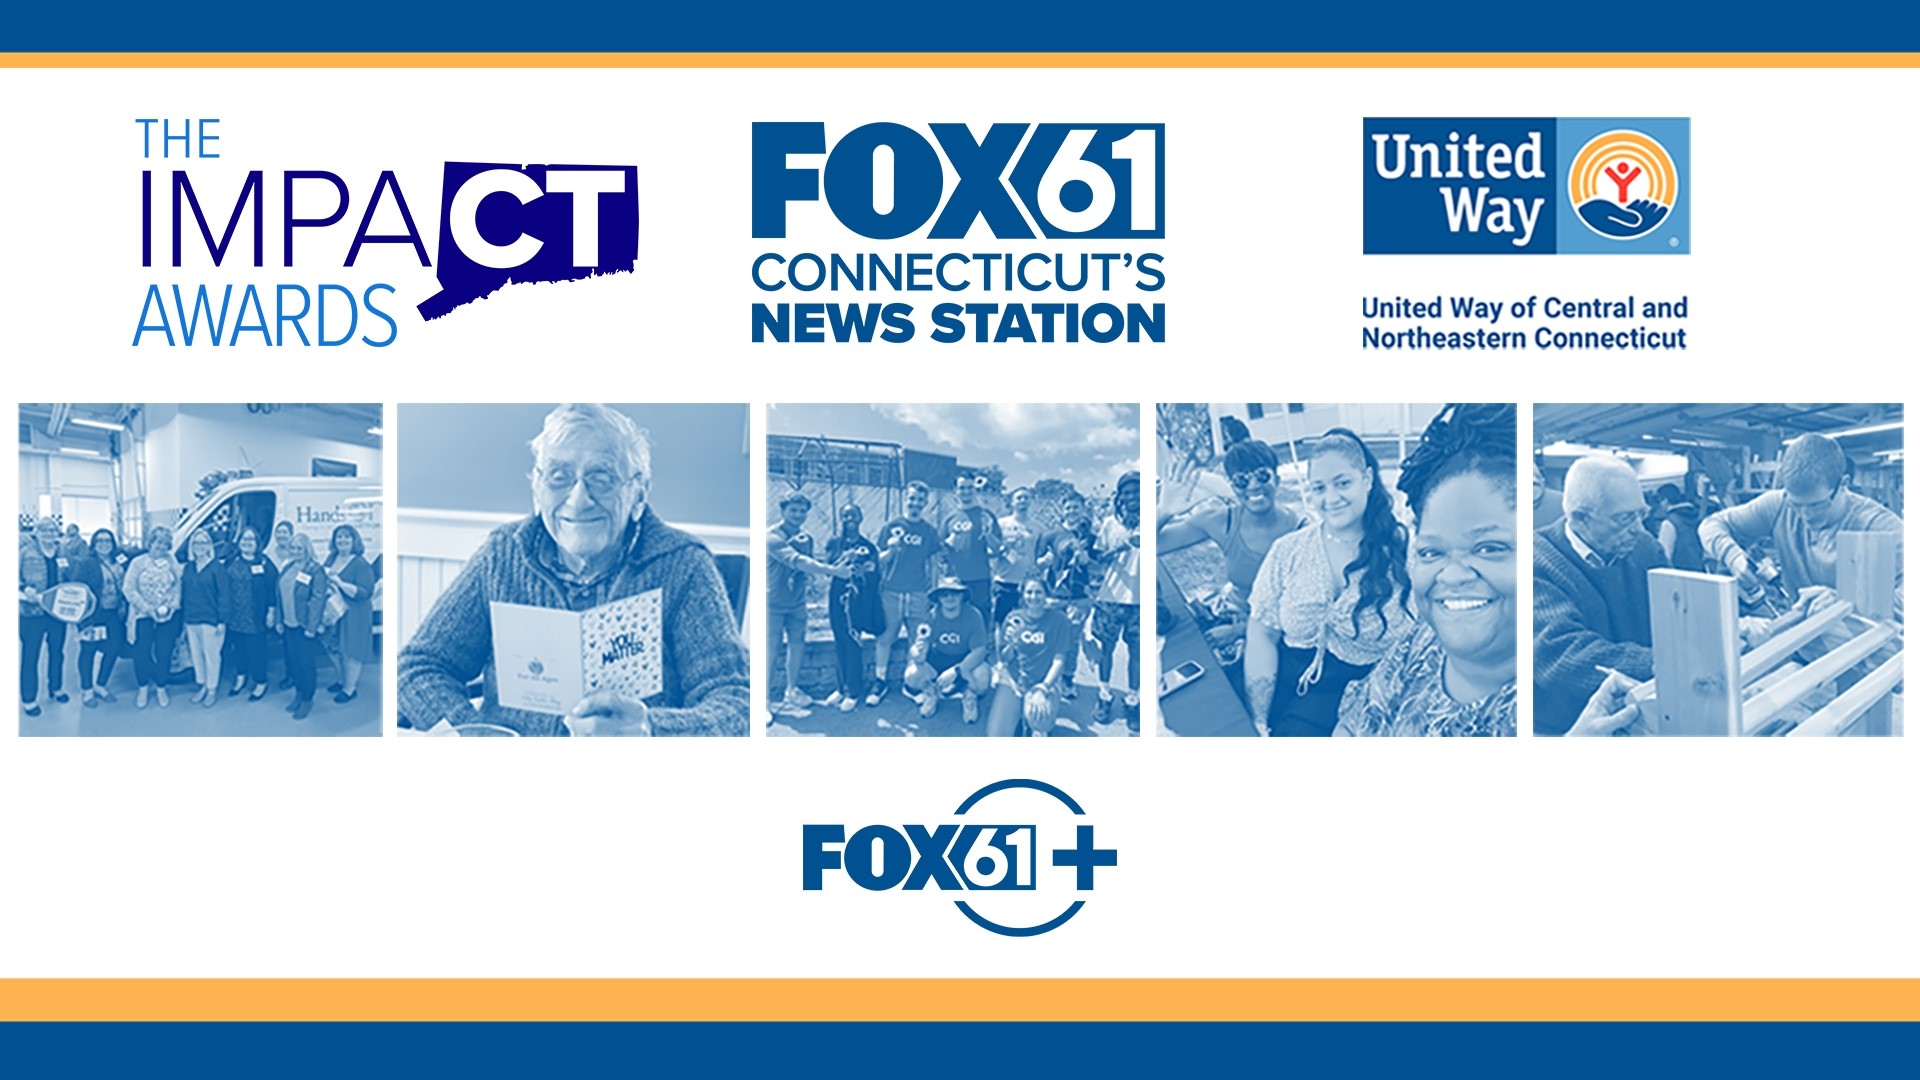 FOX61/CW20 and United Way of Central and Northeastern Connecticut hosted the inaugural ImpaCT Awards.